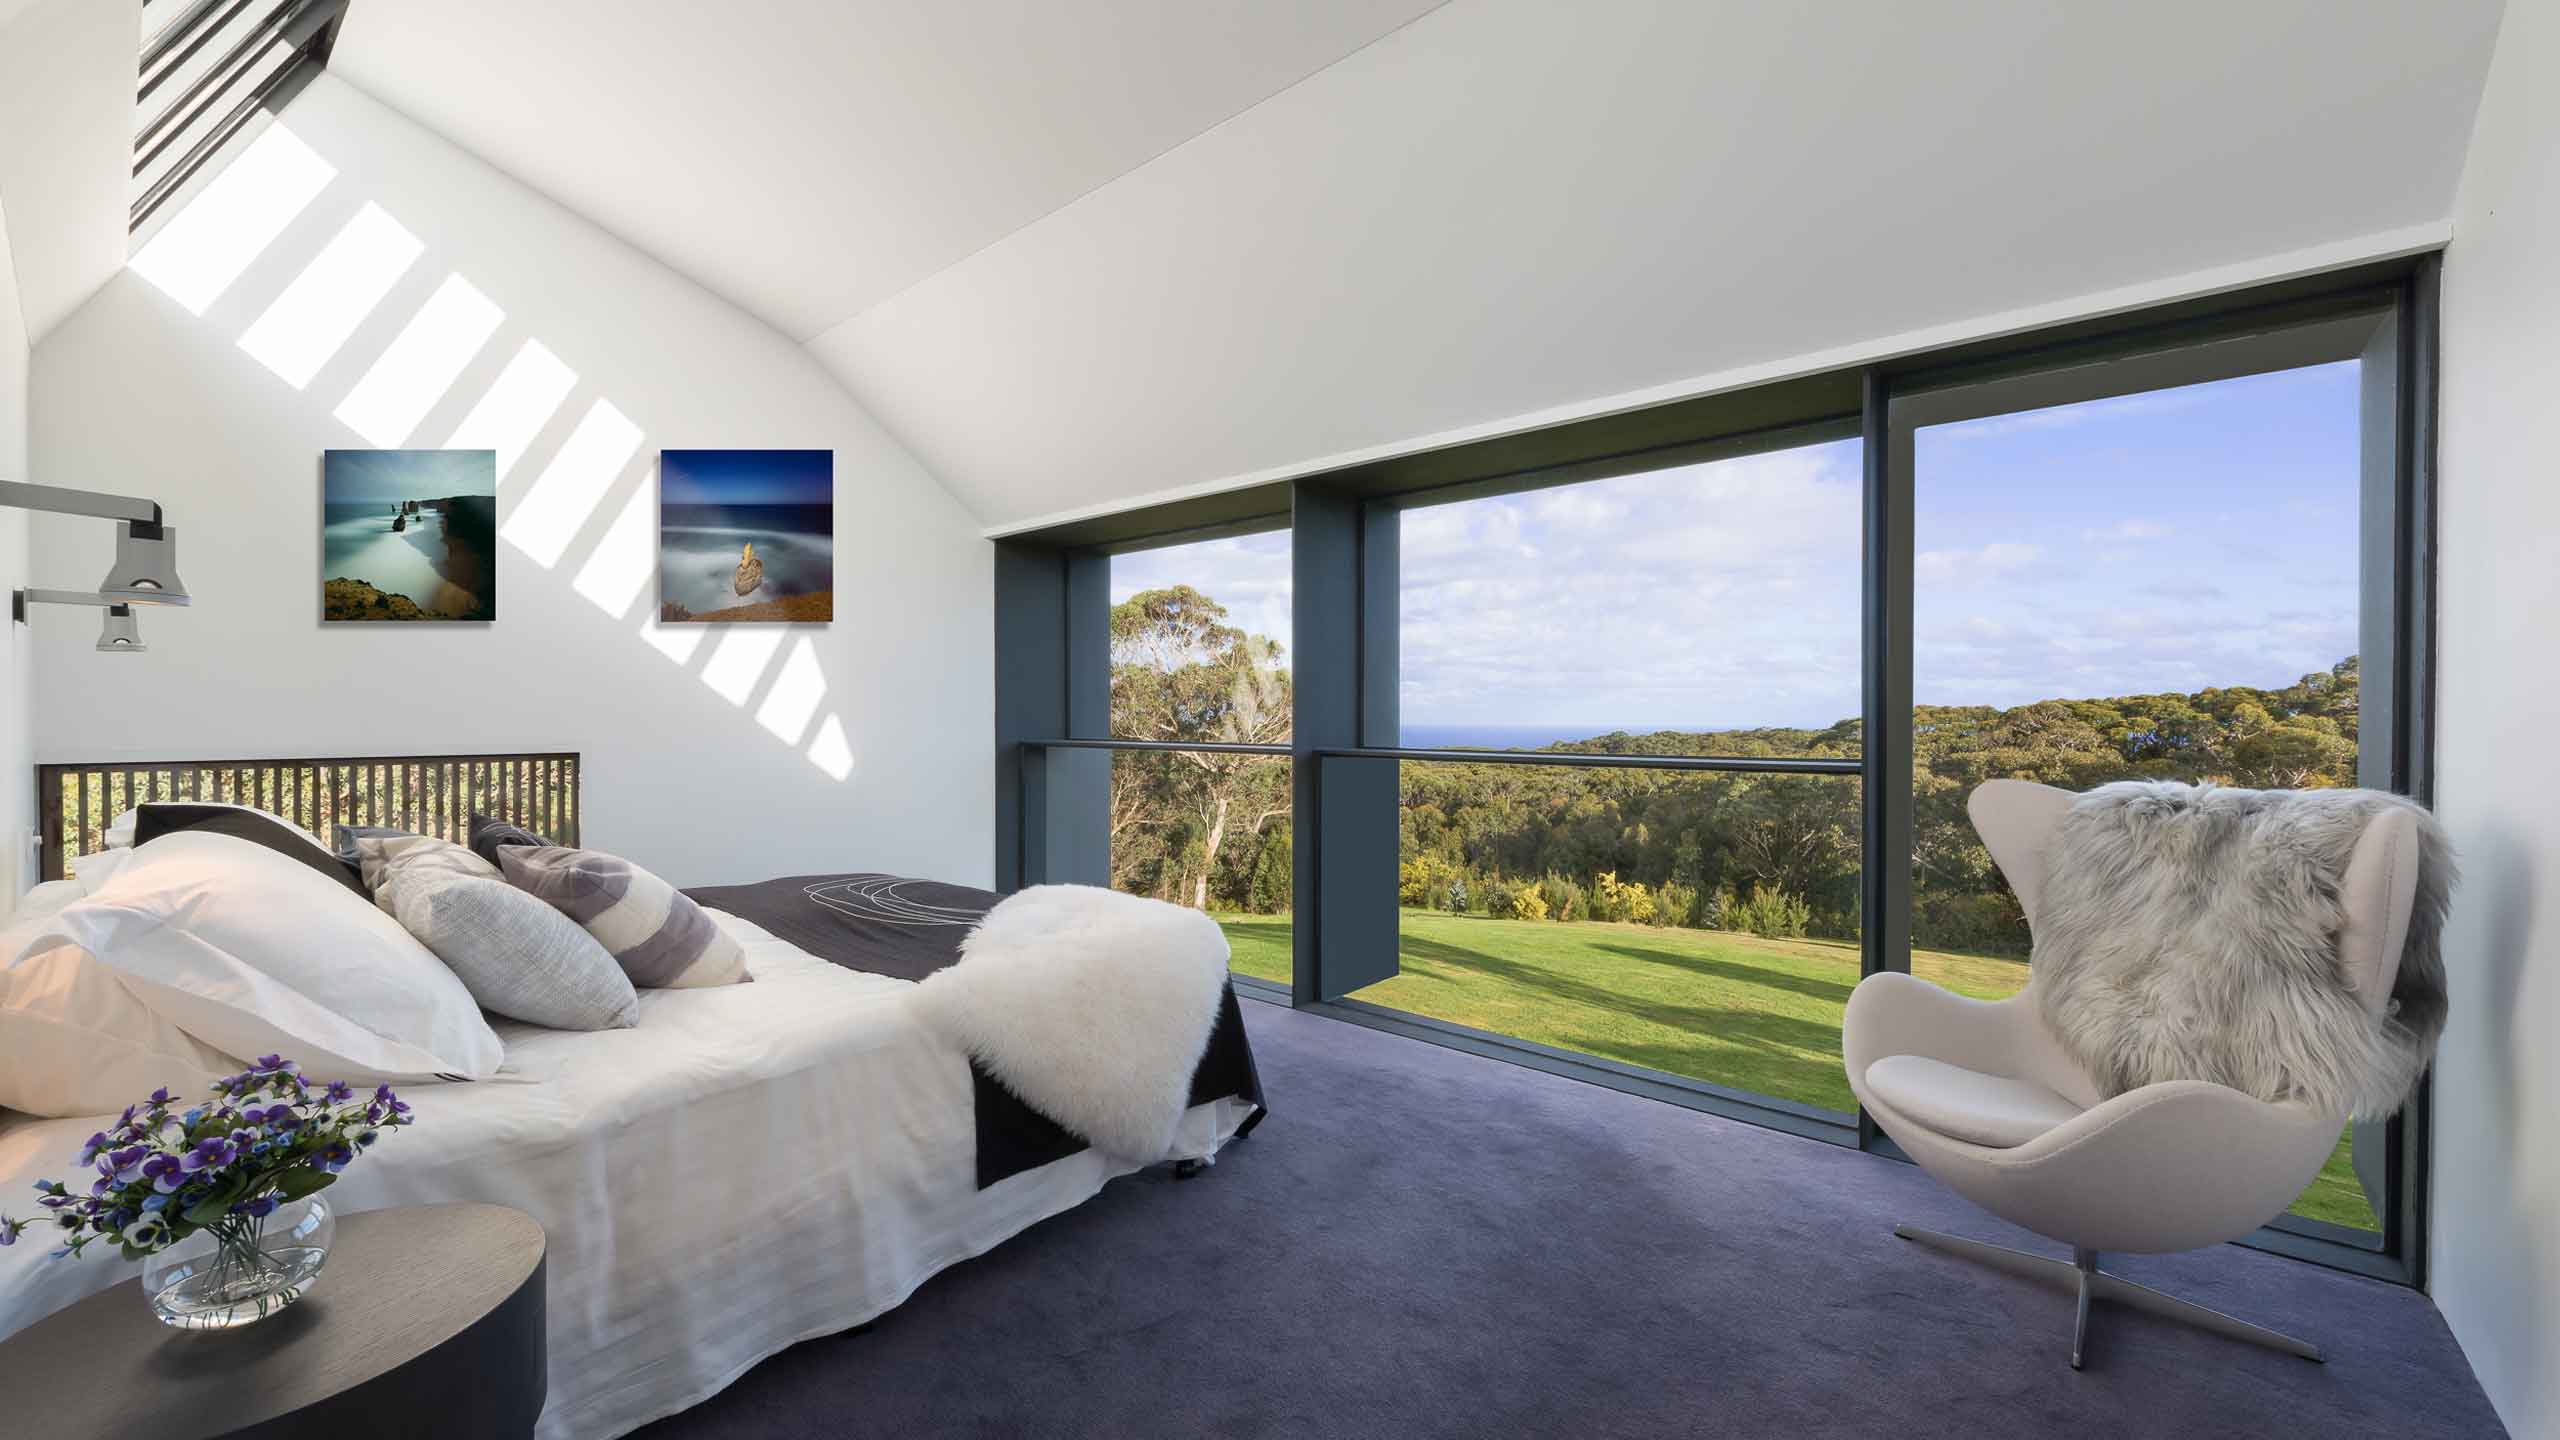 alkina-lodge-great-ocean-road-victoria-australia-room-out-to-view